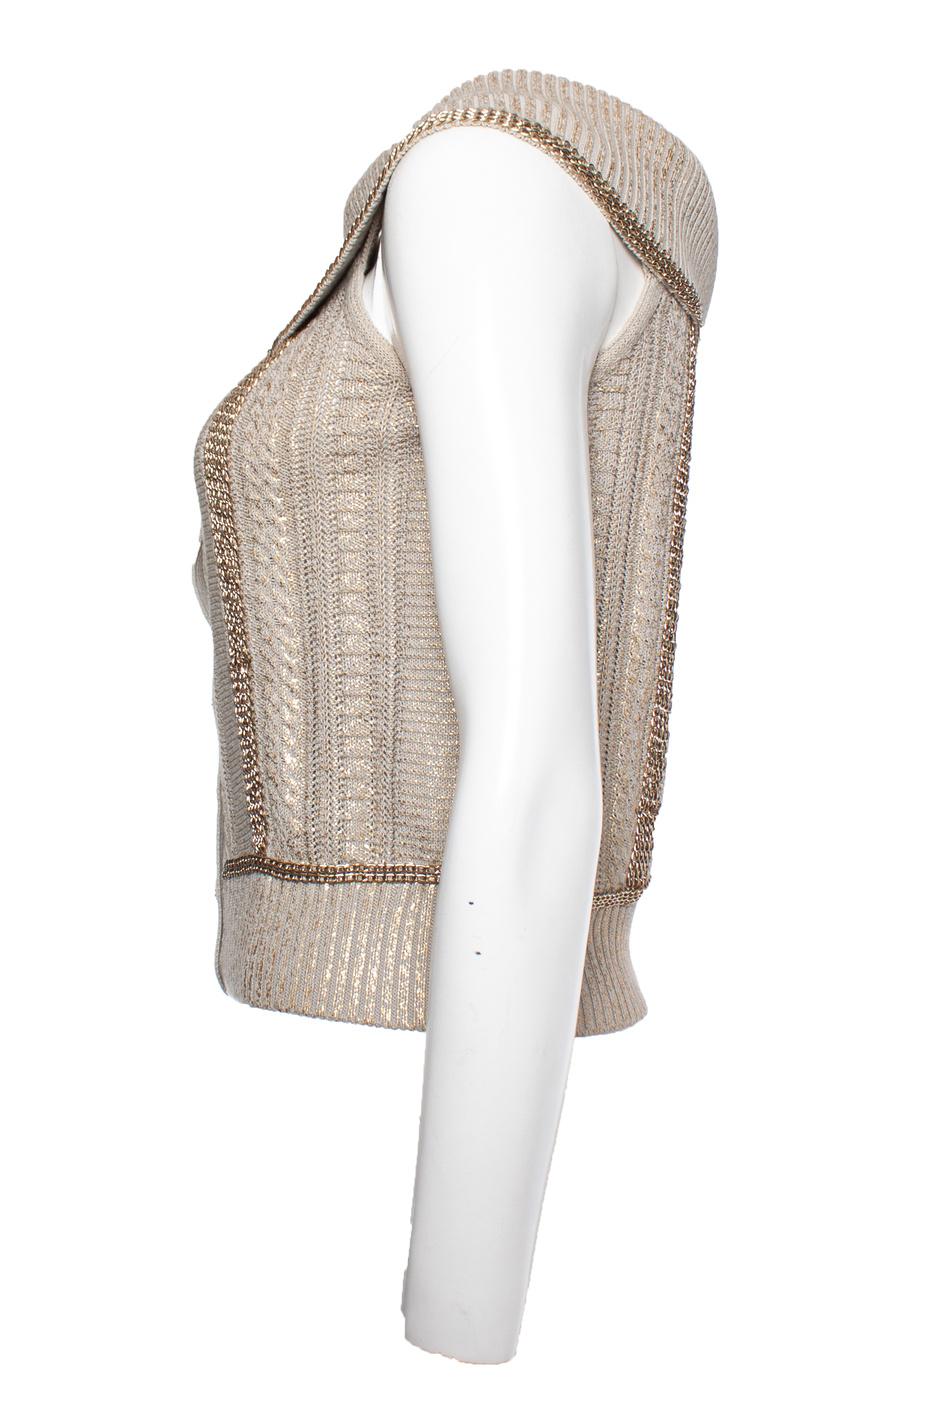 Chanel, beige knitted top In Excellent Condition For Sale In AMSTERDAM, NL